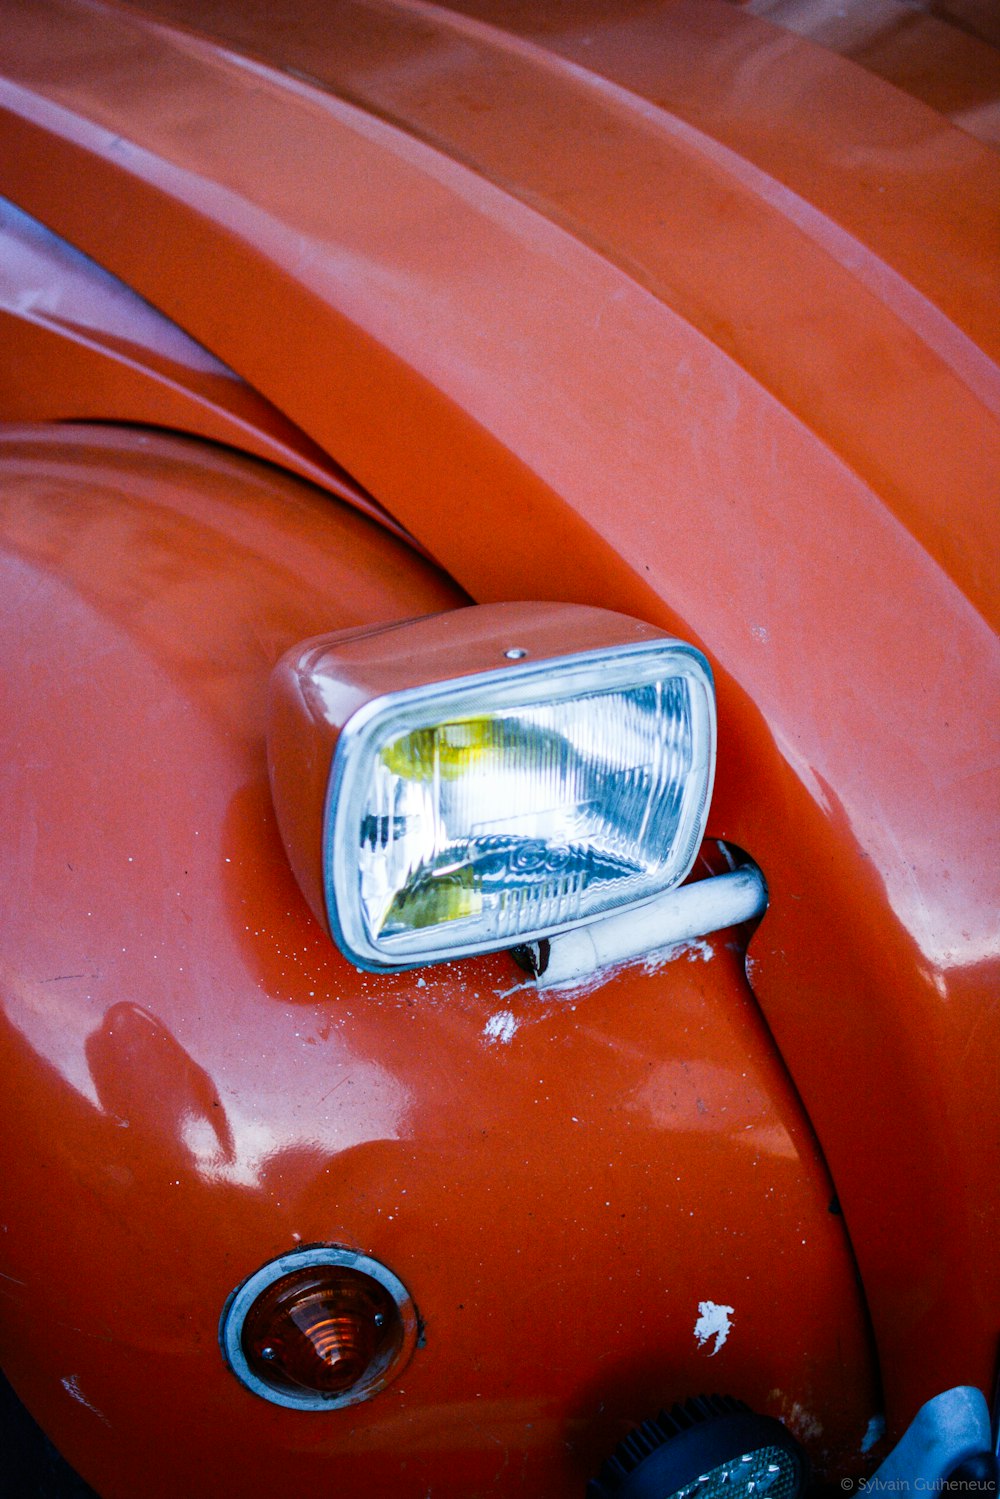 close view of red vehicle with headlight